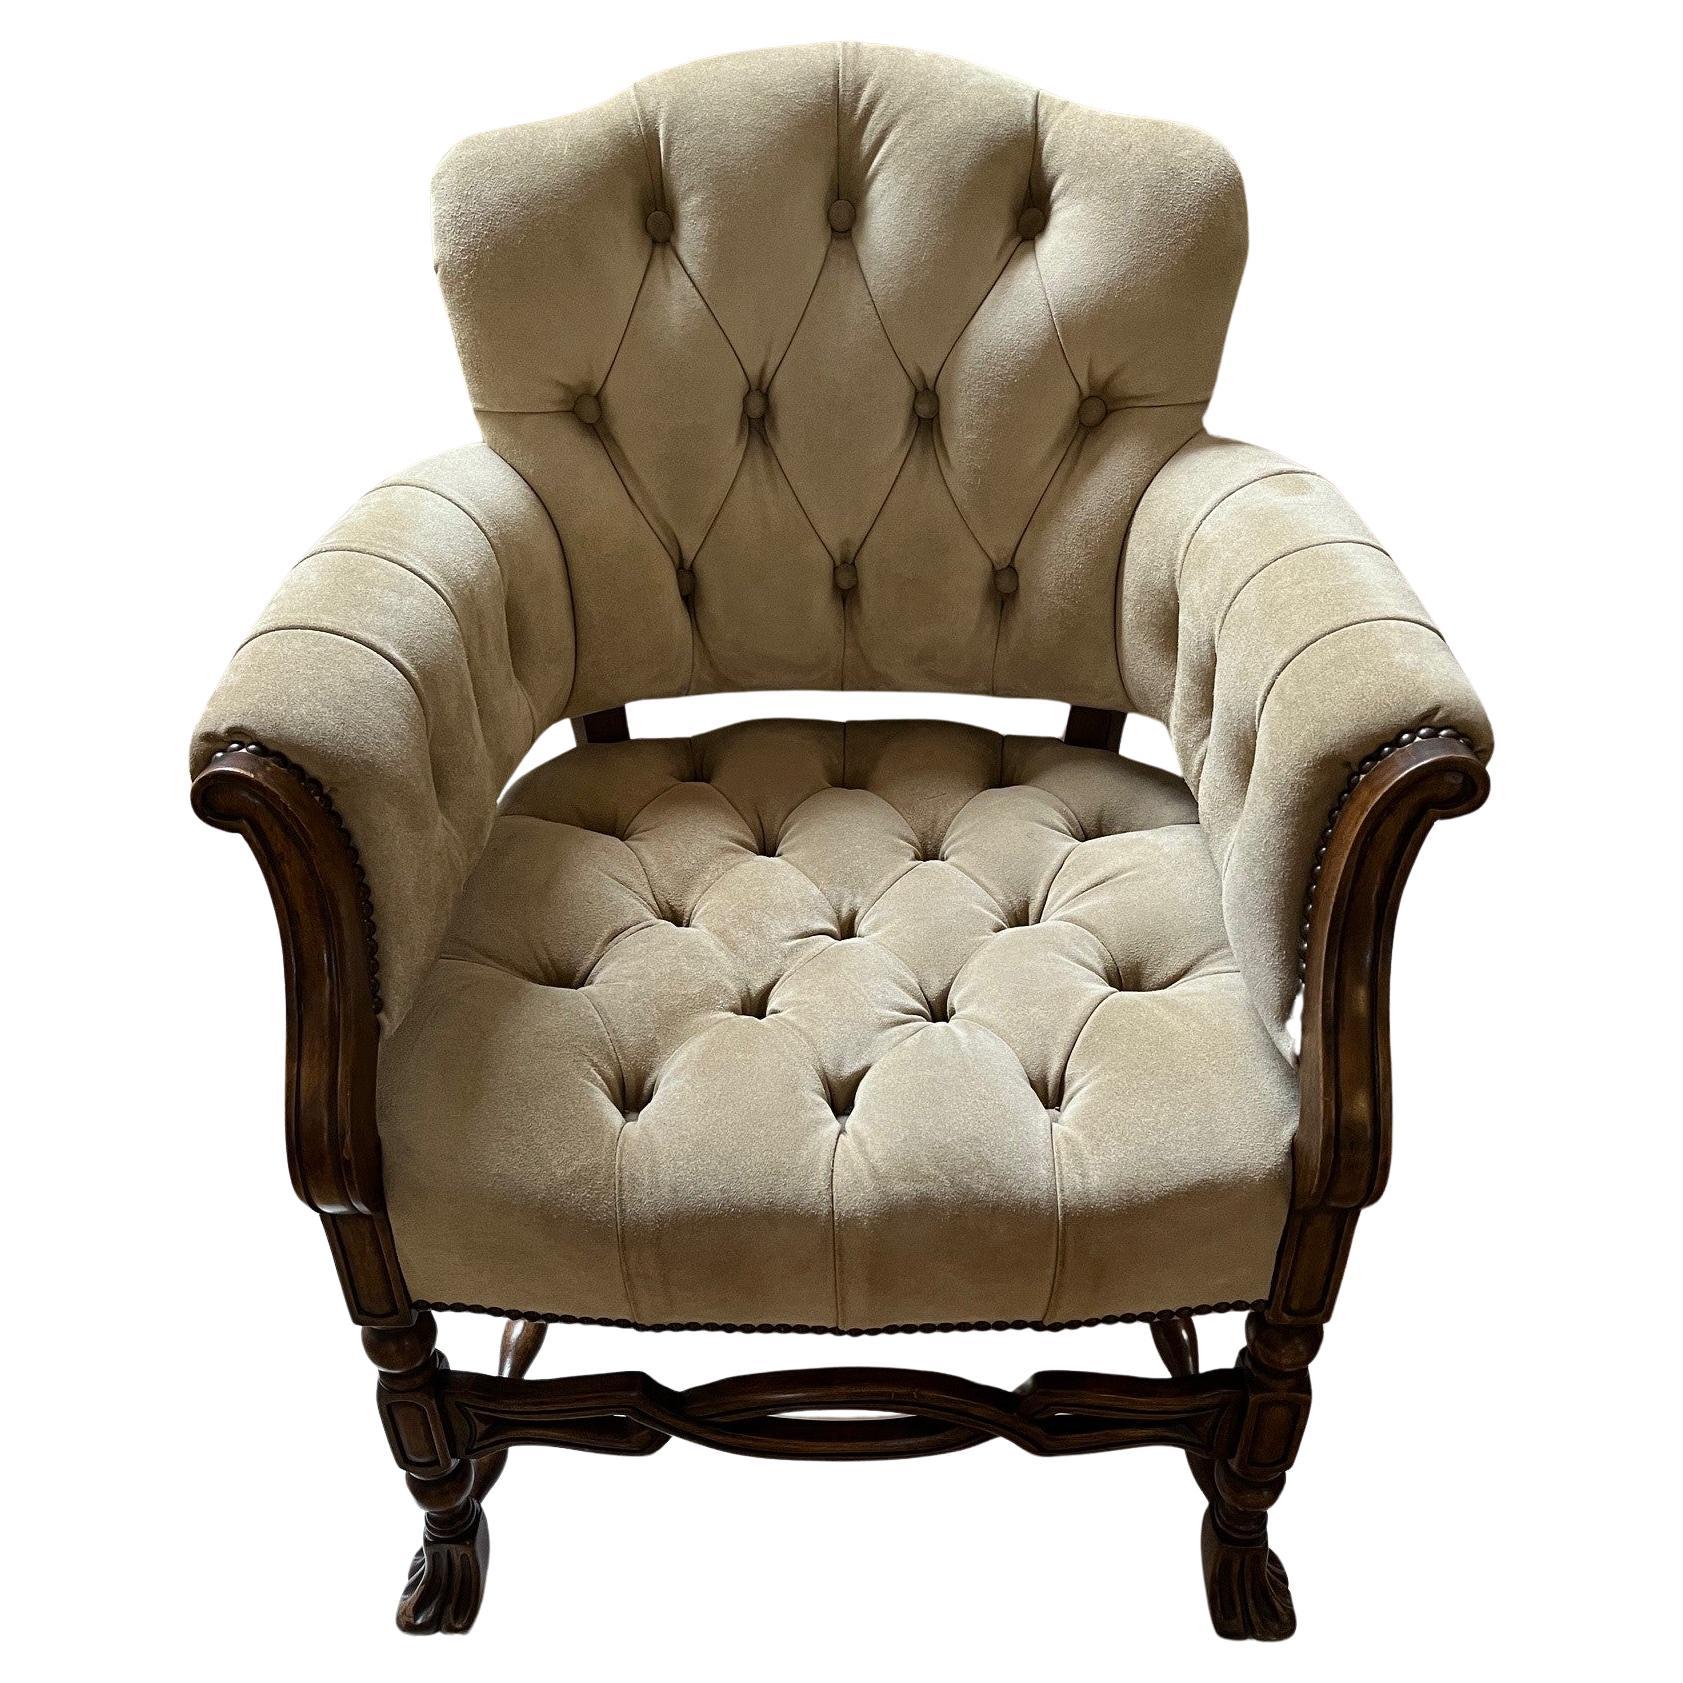 Made to Order Elegant Tufted Seat and Back in Beige Suede Leather Seville Chair